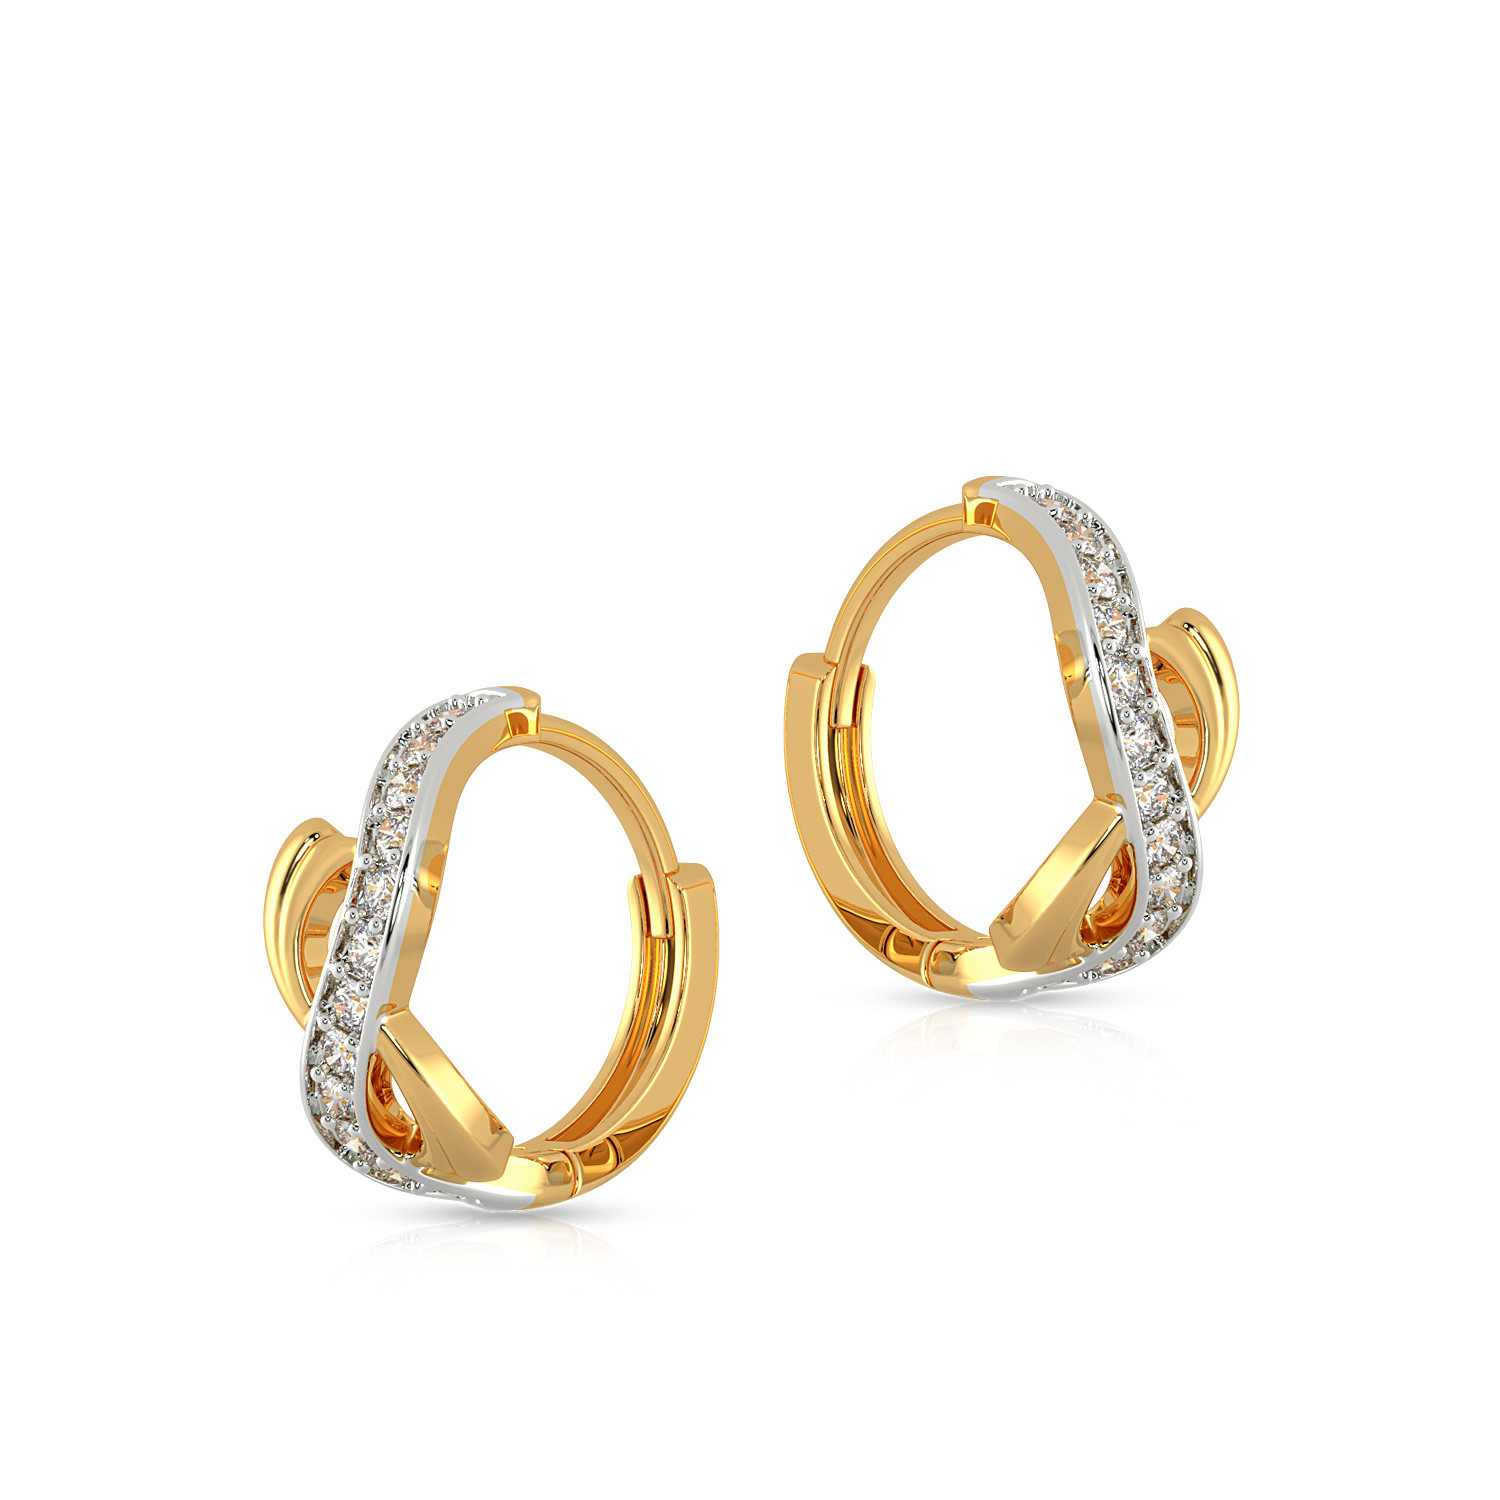 Gold studs from Malabar  Gold earring starting from Rs 6000  Light weight gold  earrings  YouTube